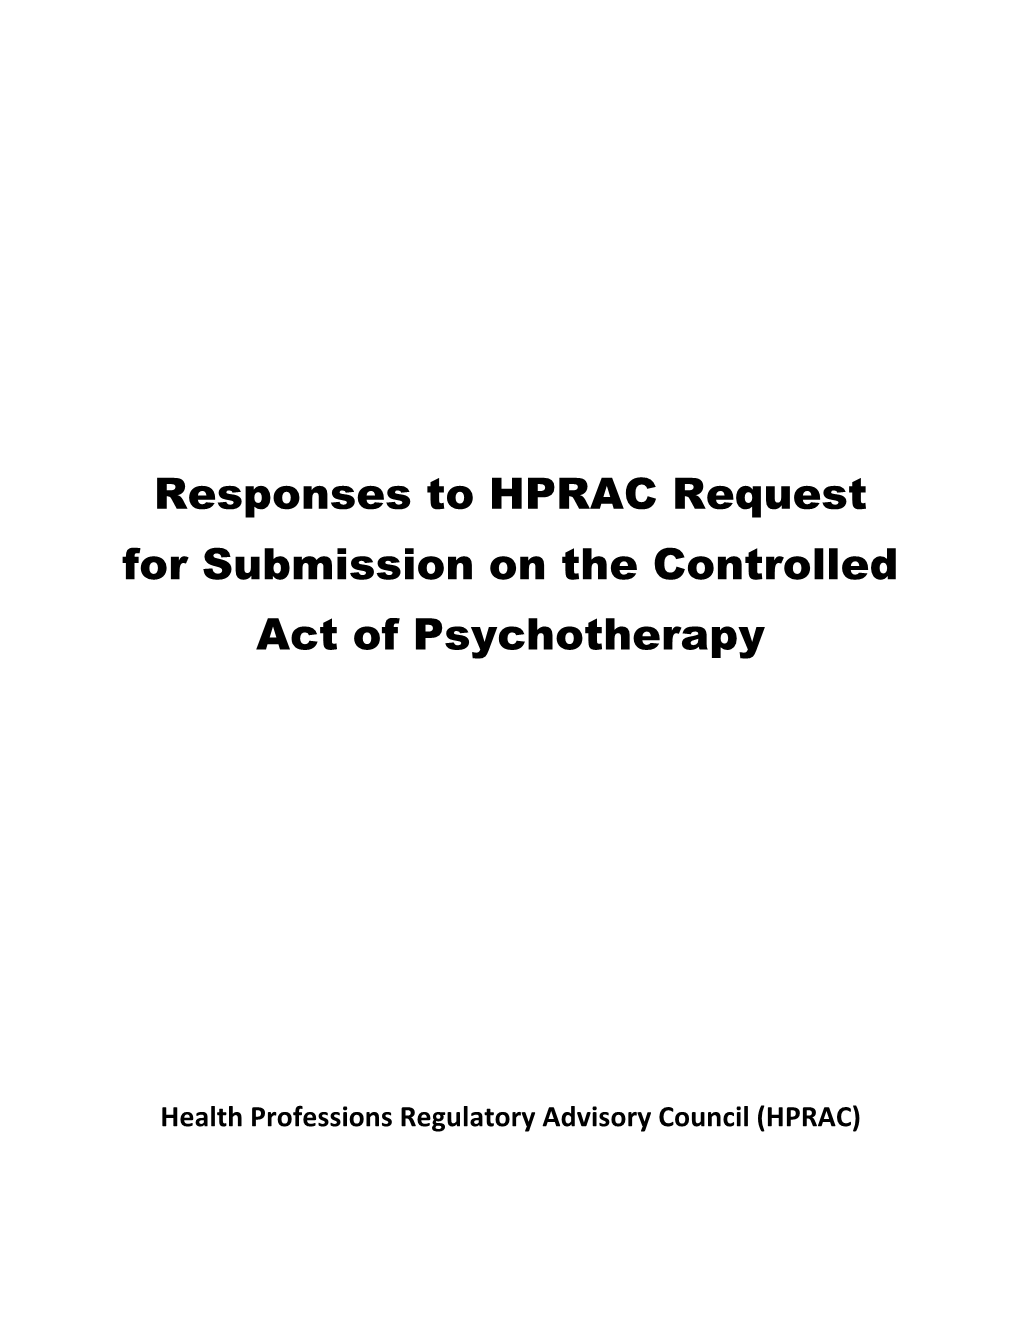 Responses to HPRAC Request for Submission on the Controlled Act of Psychotherapy